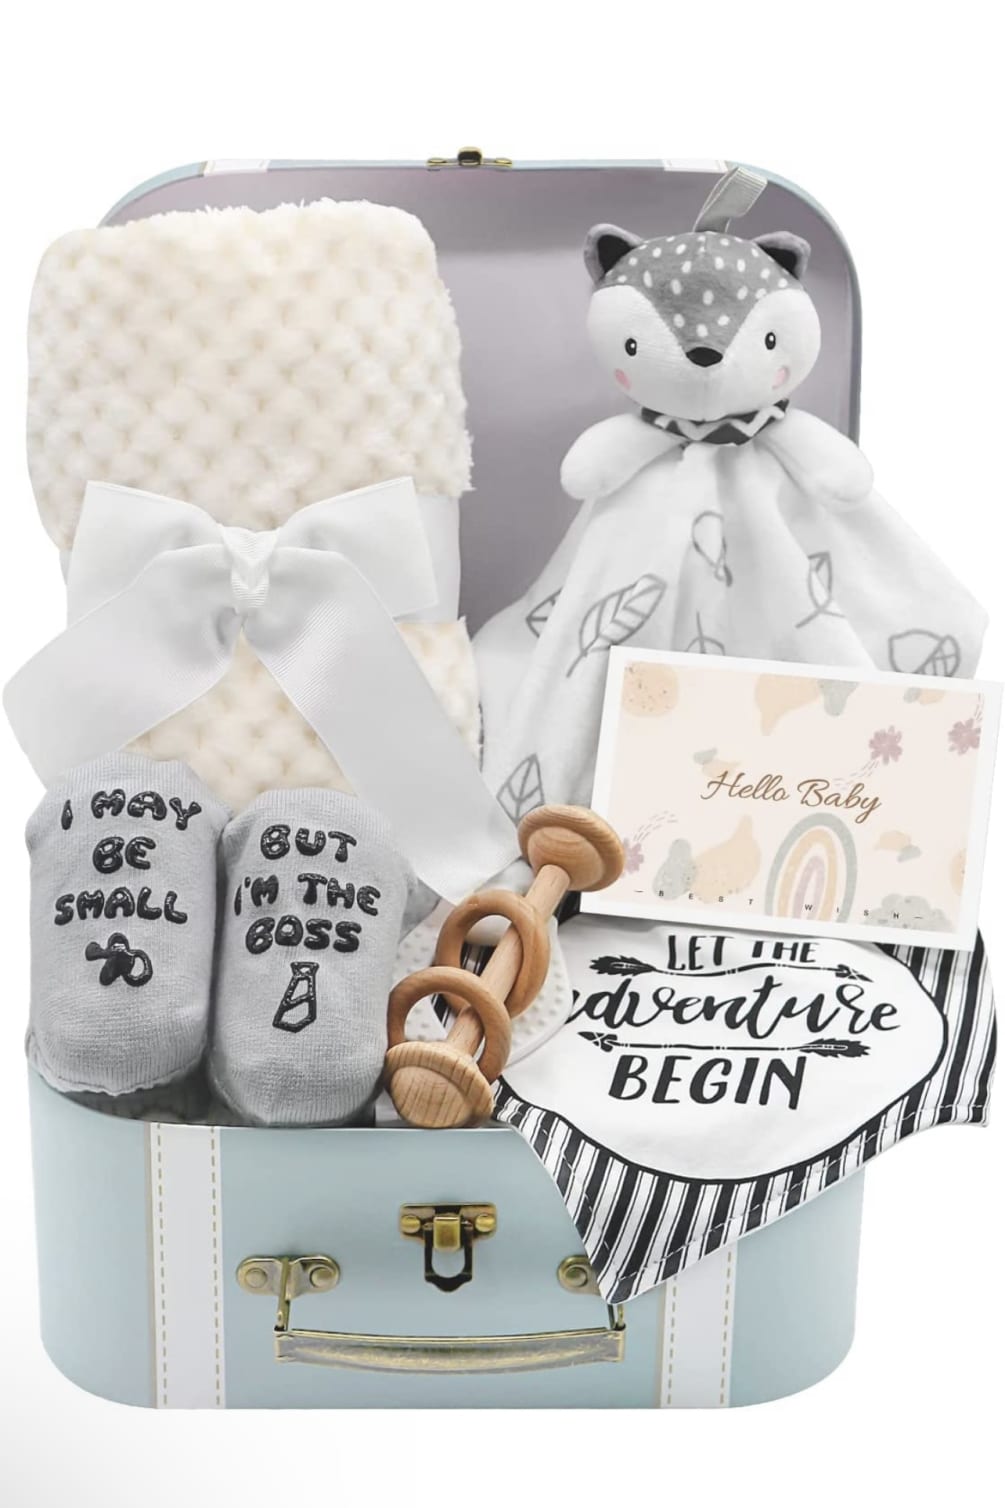 Baby Boy Gifts Basket included Newborn Baby lovely Security blanket wooden rattle